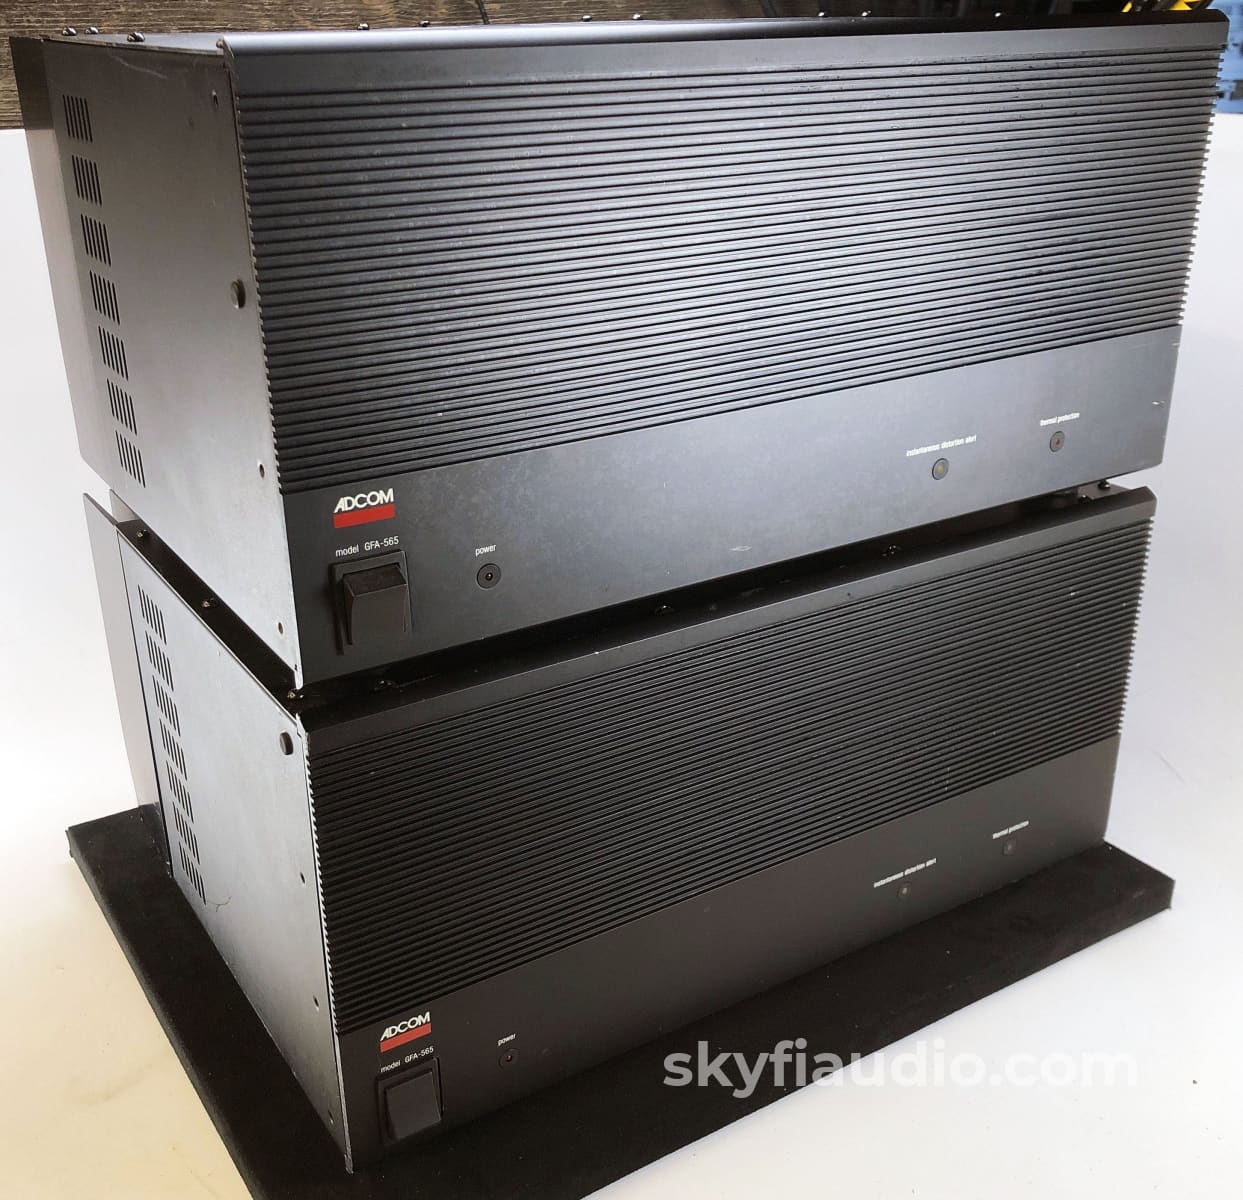 Adcom Gfa-565 Monoblock Amplifiers - Serviced And Ready To Rock! Amplifier